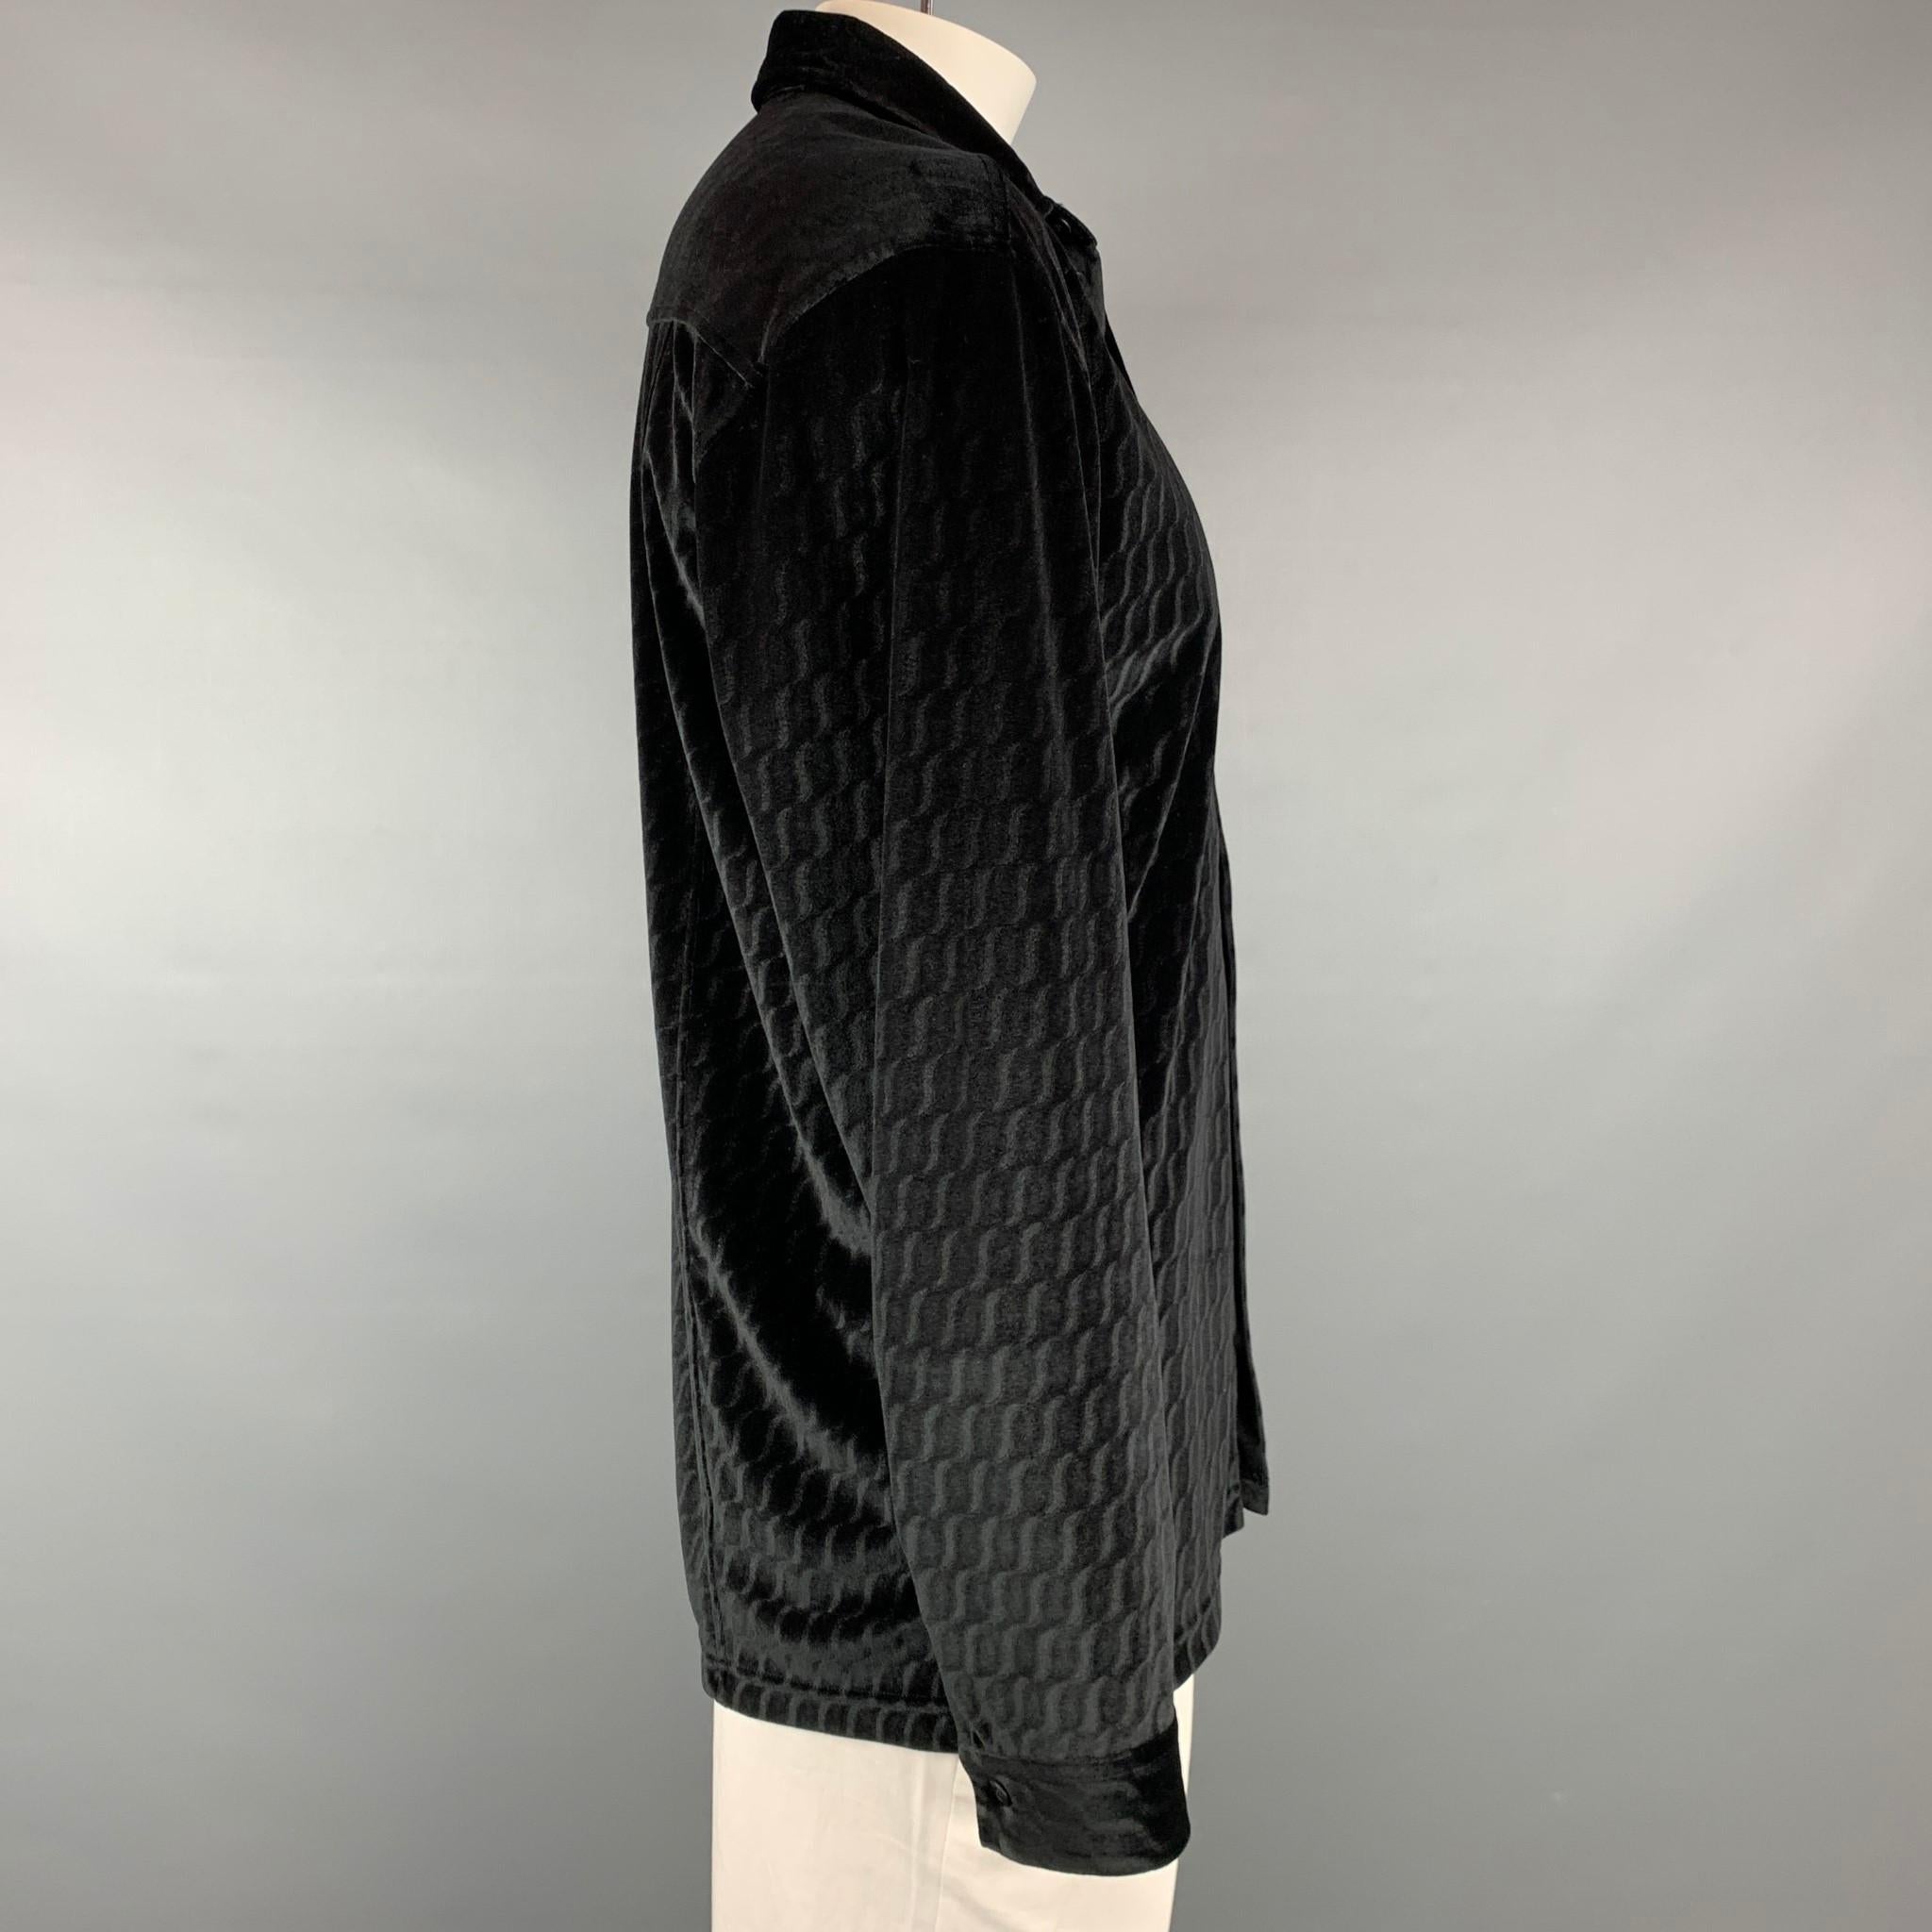 ARMANI COLLEZIONI long sleeve shirt comes in a black swirl print velvet featuring a button up style and a pointed collar. 

New With Tags.
Marked: XL

Measurements:

Shoulder: 22 in.
Chest: 44 in.
Sleeve: 26.5 in.
Length: 30.5 in. 